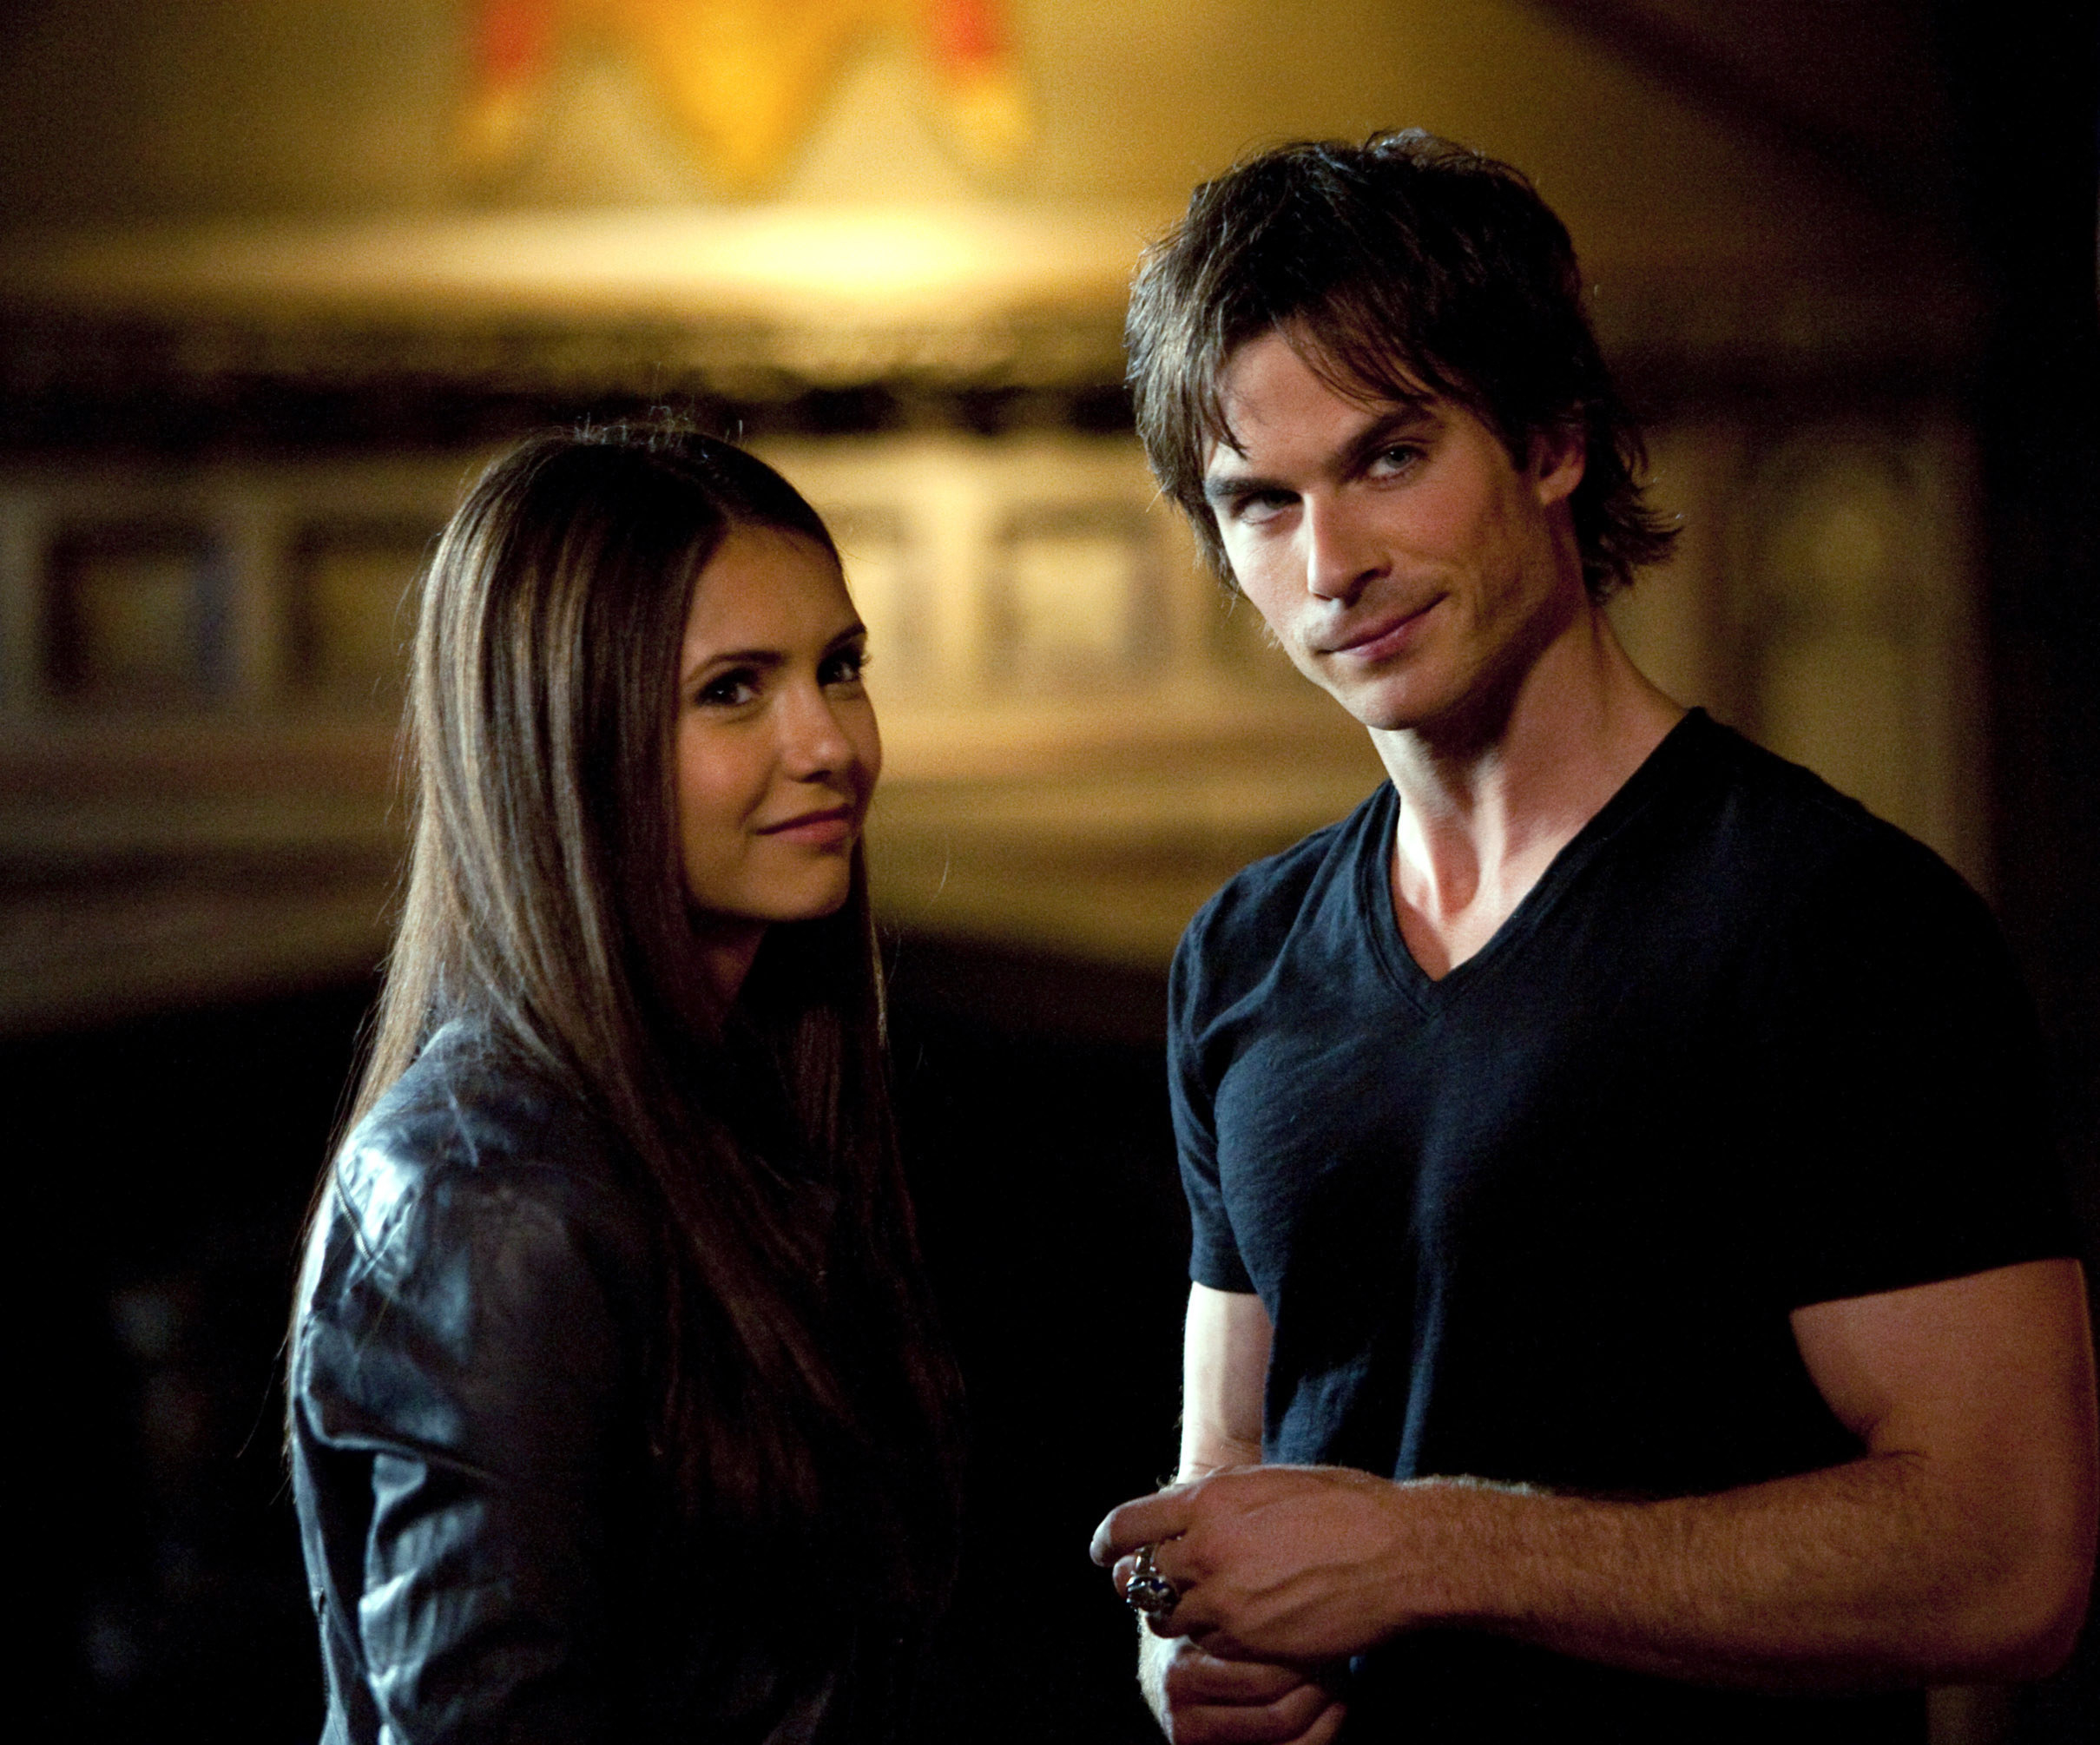 Elena and Damon stand together, looking like they&#x27;re in cahoots